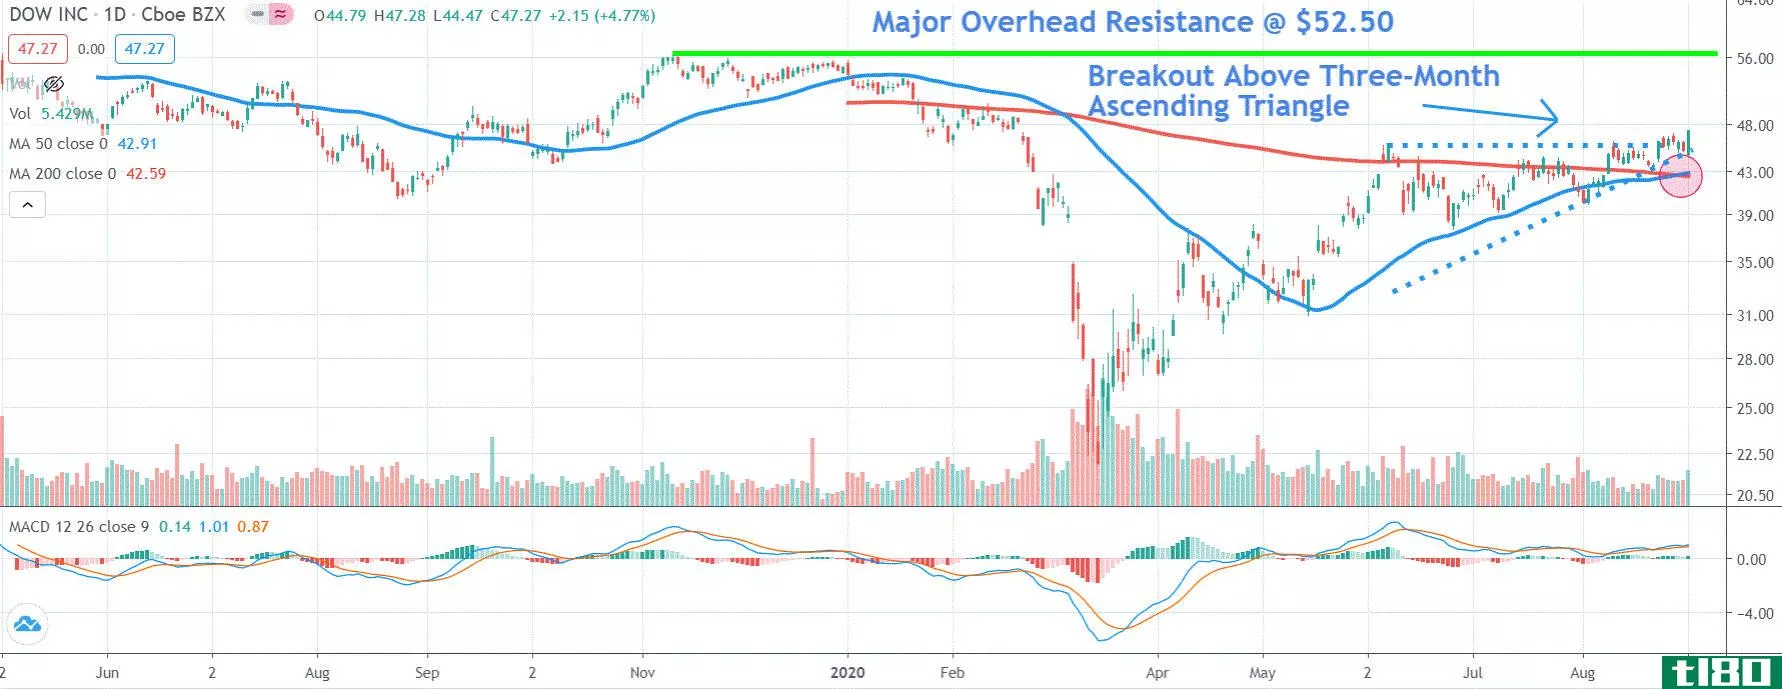 Chart depicting the share price of Dow Inc. (DOW)